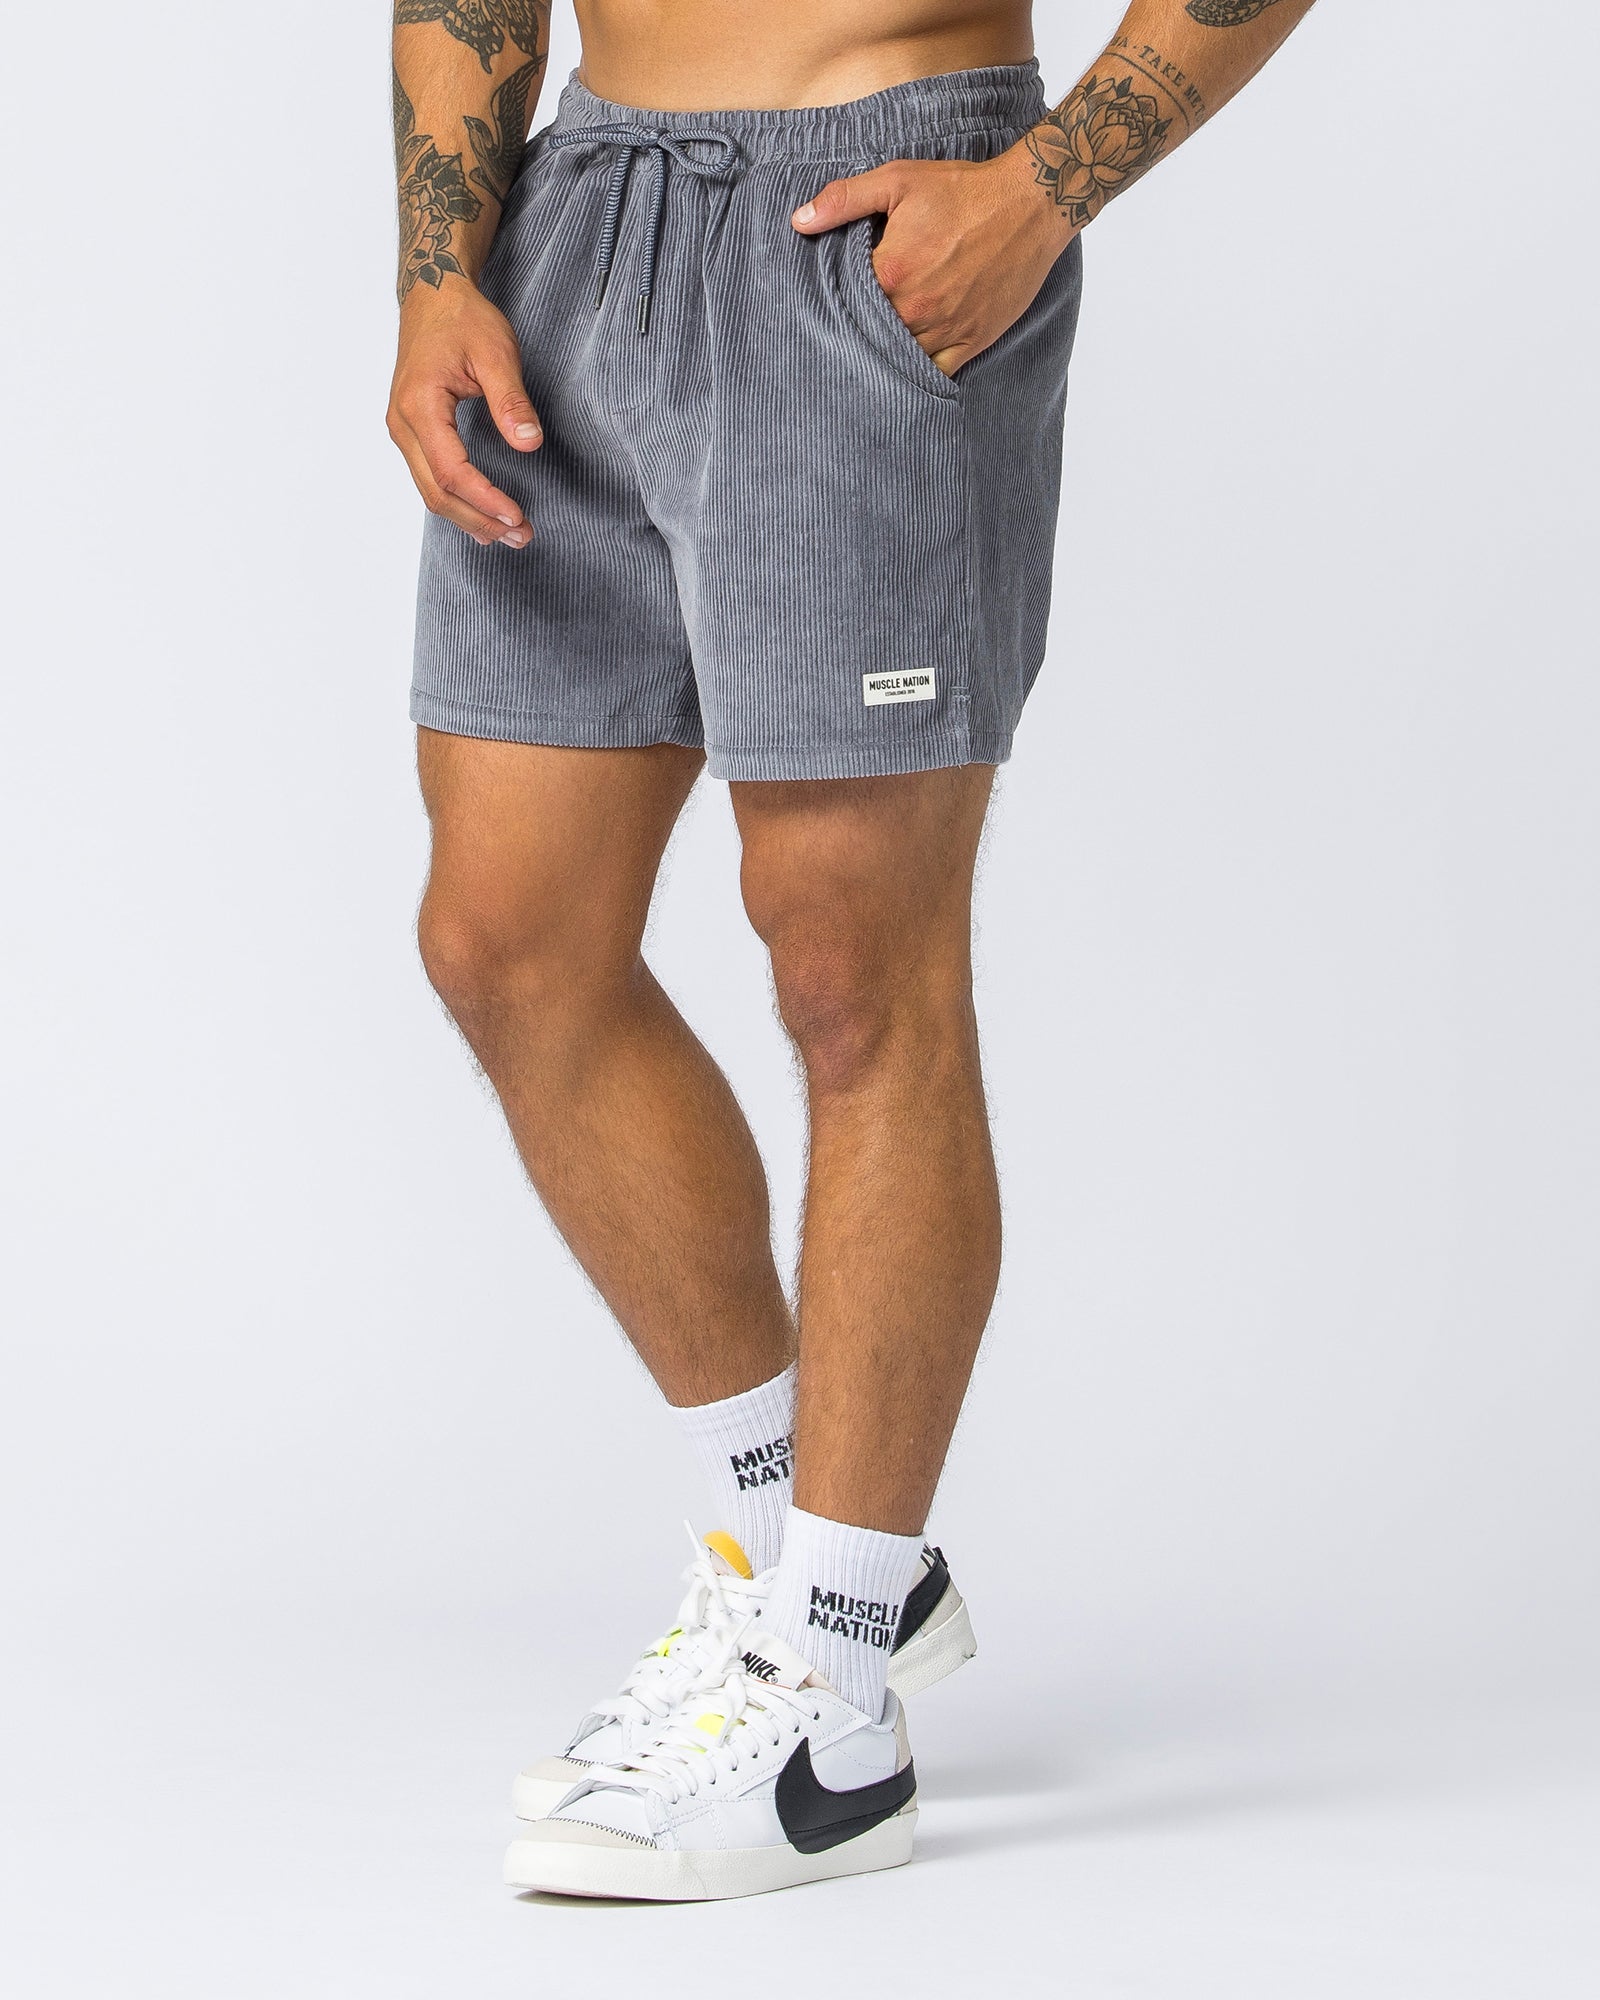 Daily Corduroy Shorts - Navy - Muscle Nation